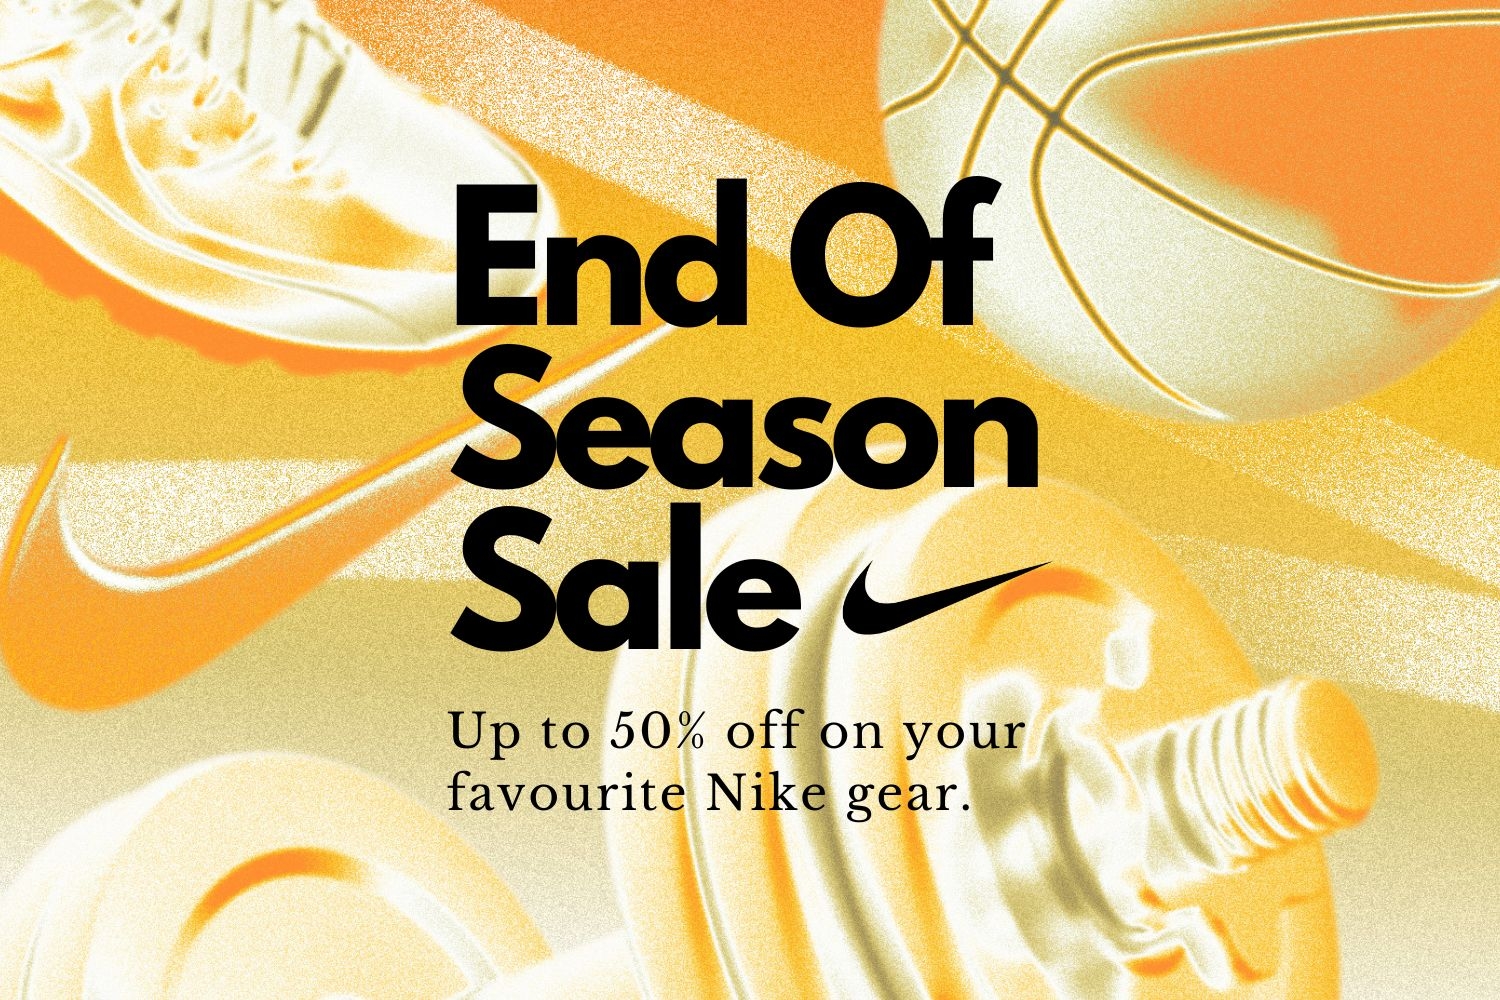 Get 50% discount in the Nike End of Season sale